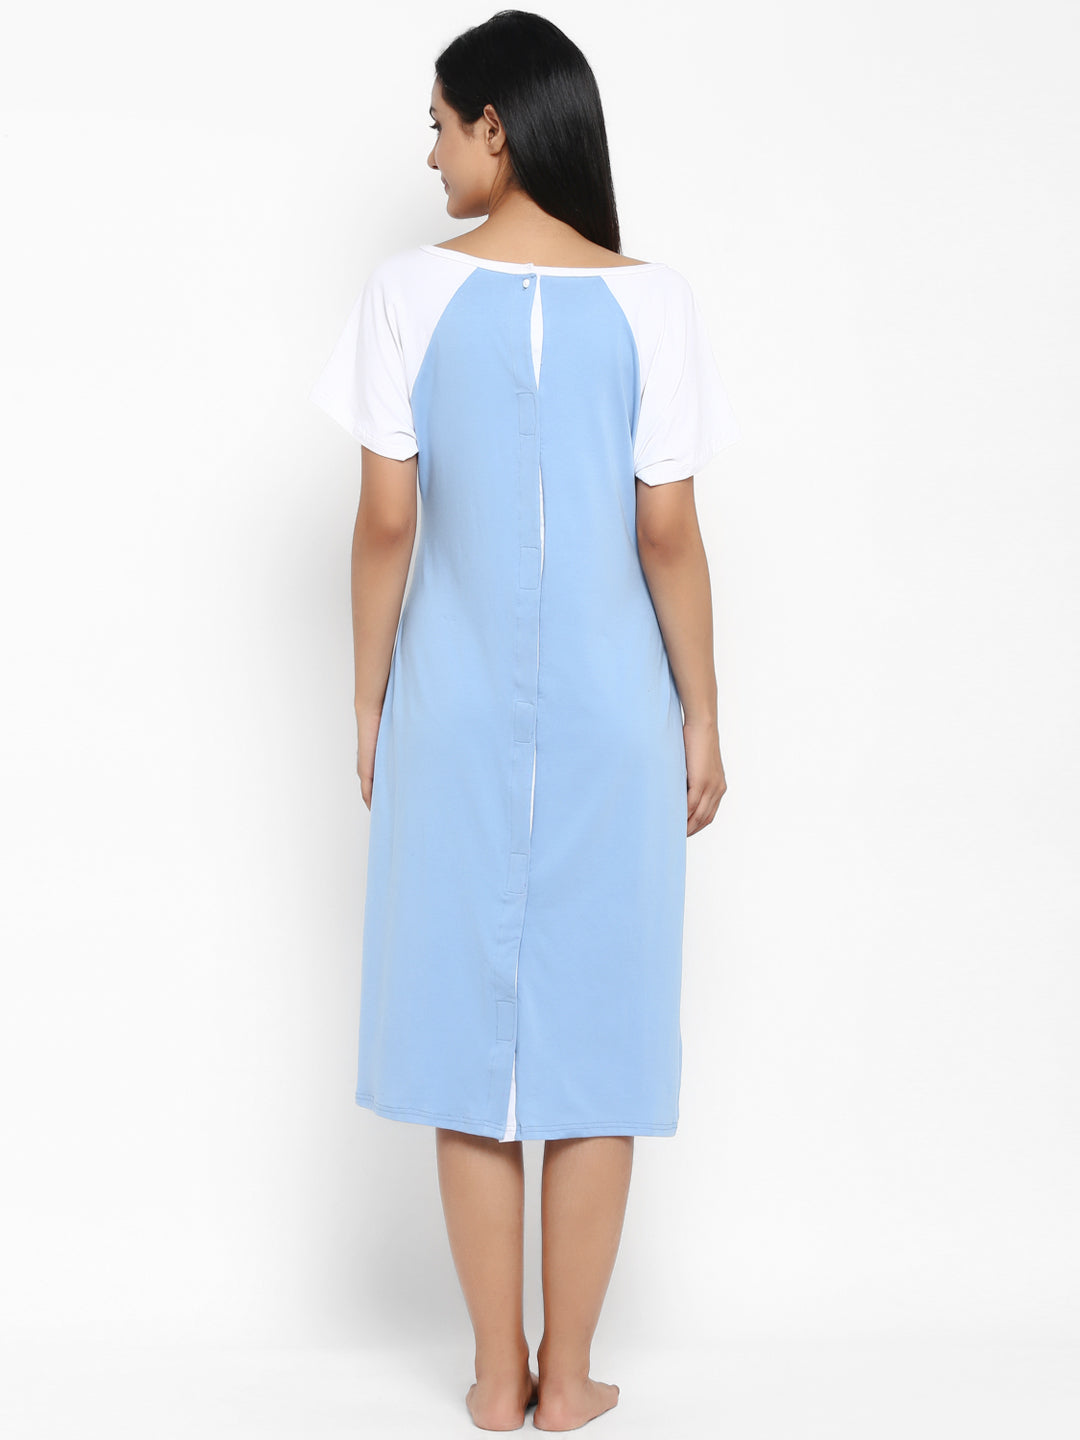 Wholesale Disposable Waterproof Blue Hospital Surgeon Long Sleeve Surgical  Sterile Doctor Gowns - China Hospital Gown and Surgical Gown price |  Made-in-China.com